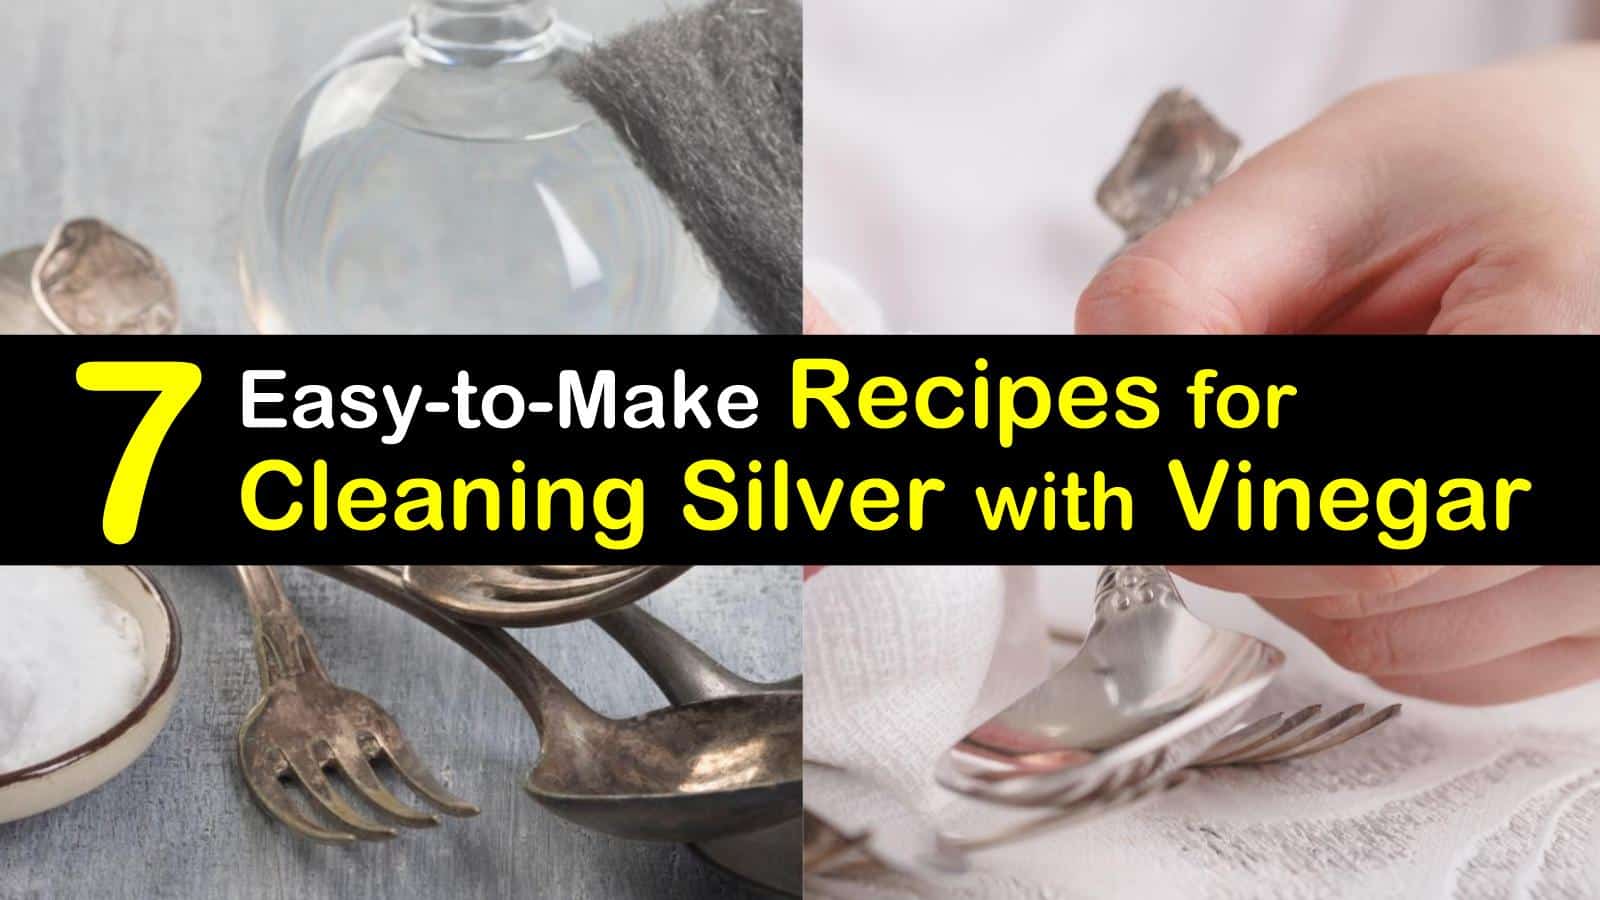 to Clean Silver with Vinegar